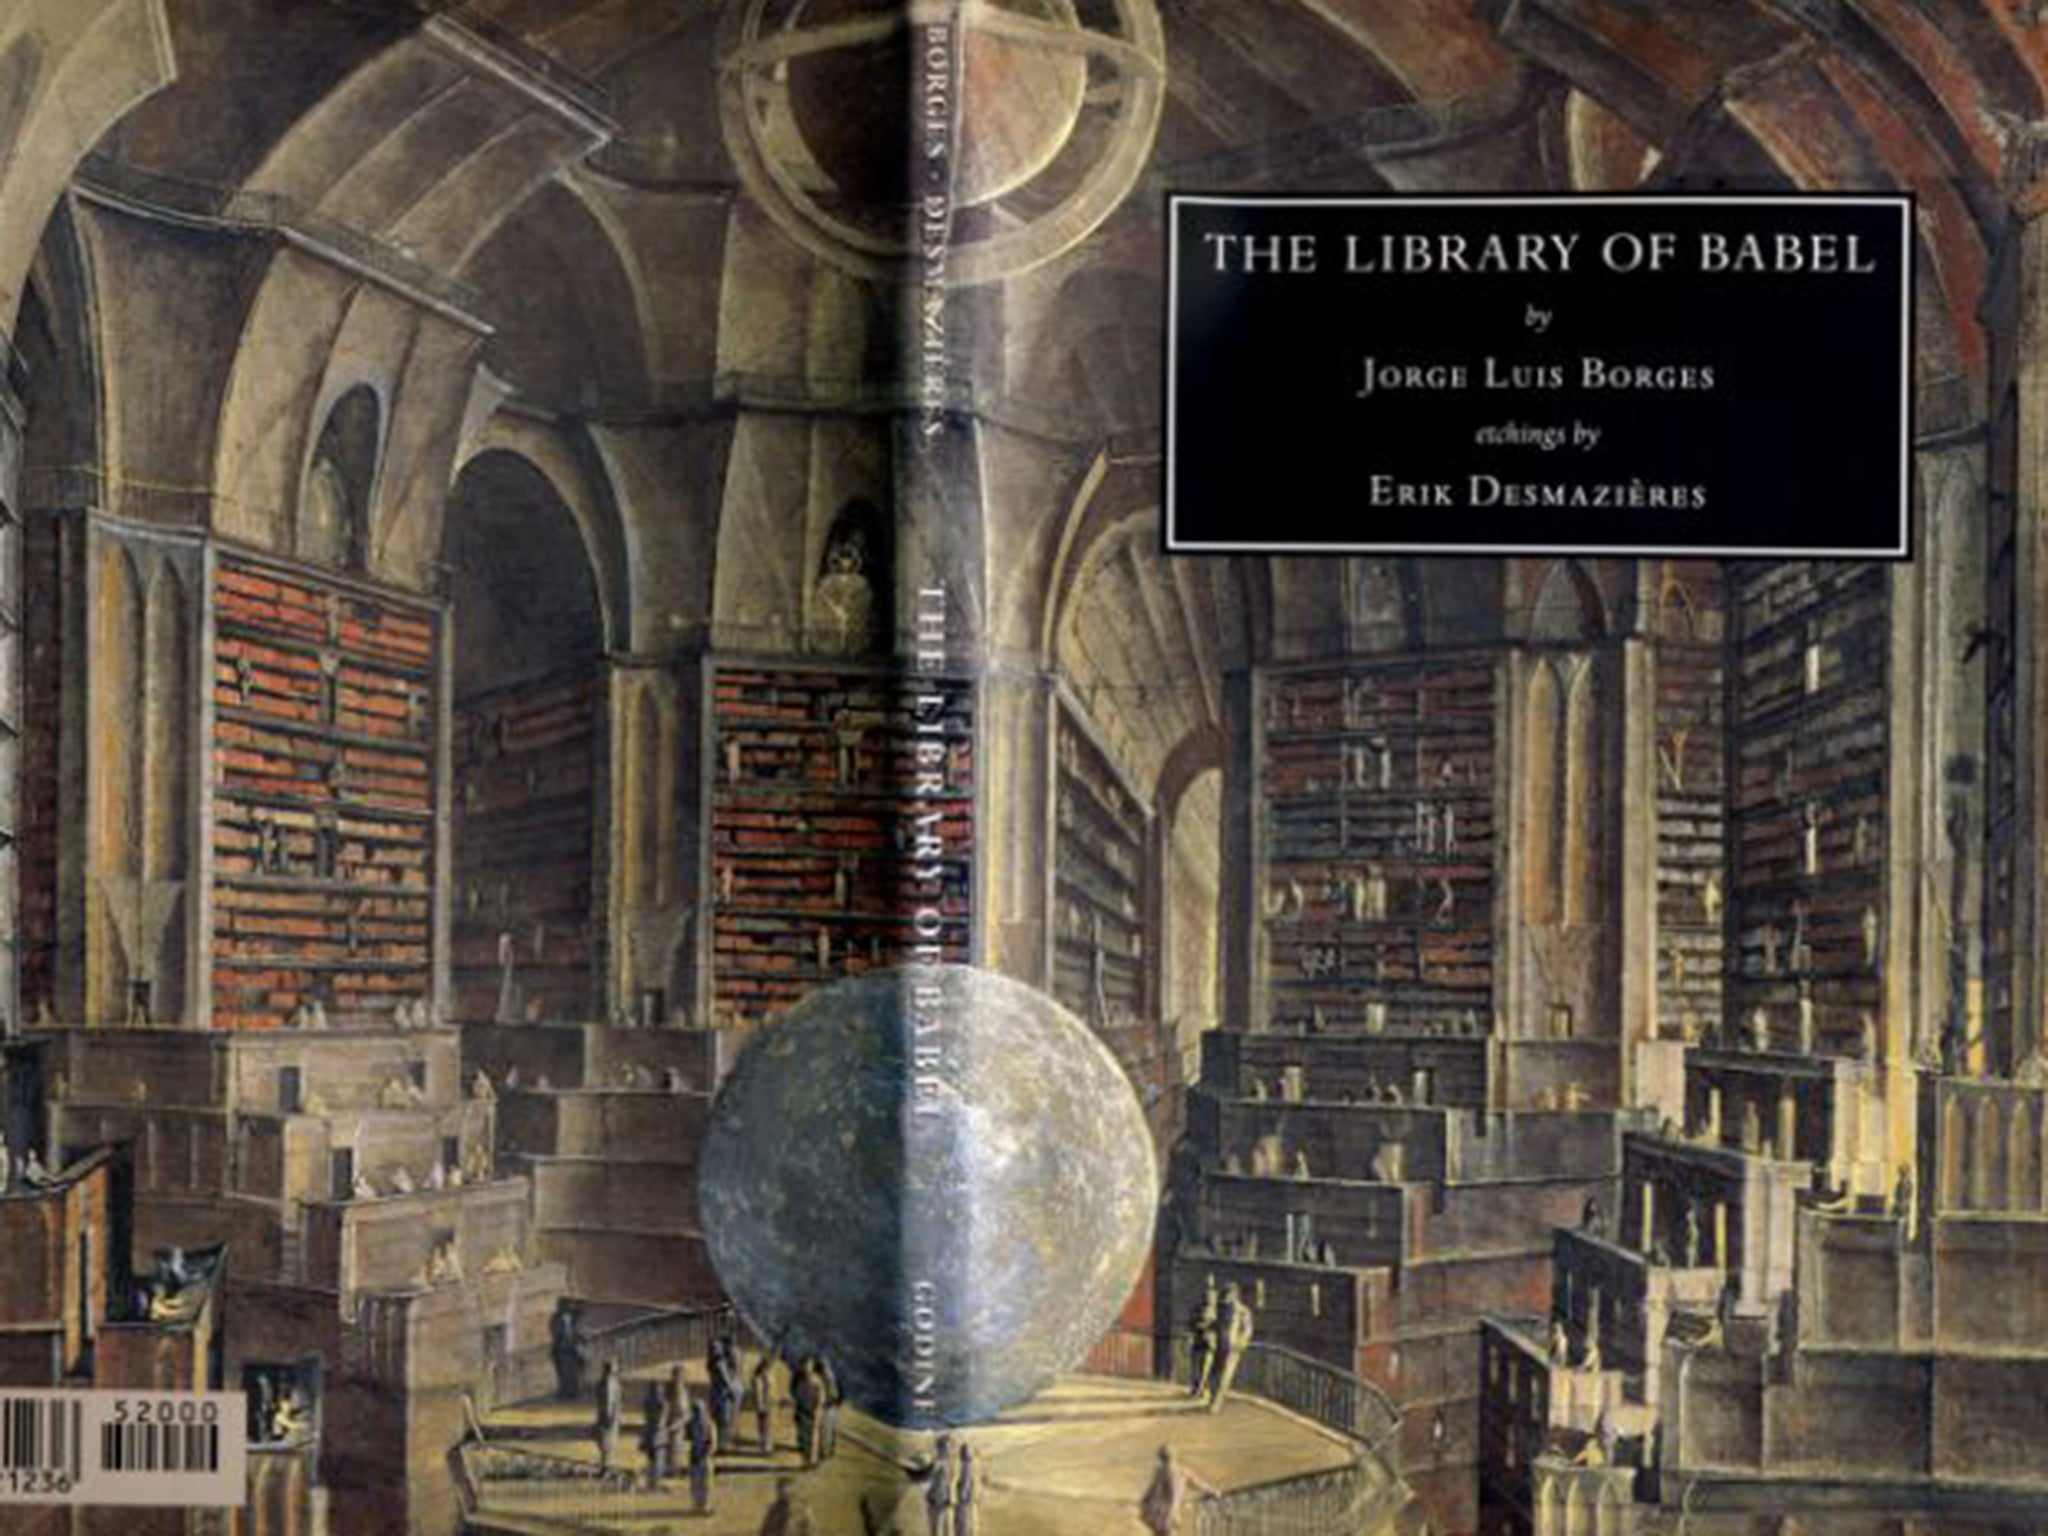 Jorge Luis Borges’ ‘The Library of Babel’ imagined endless shelves holding every possible book